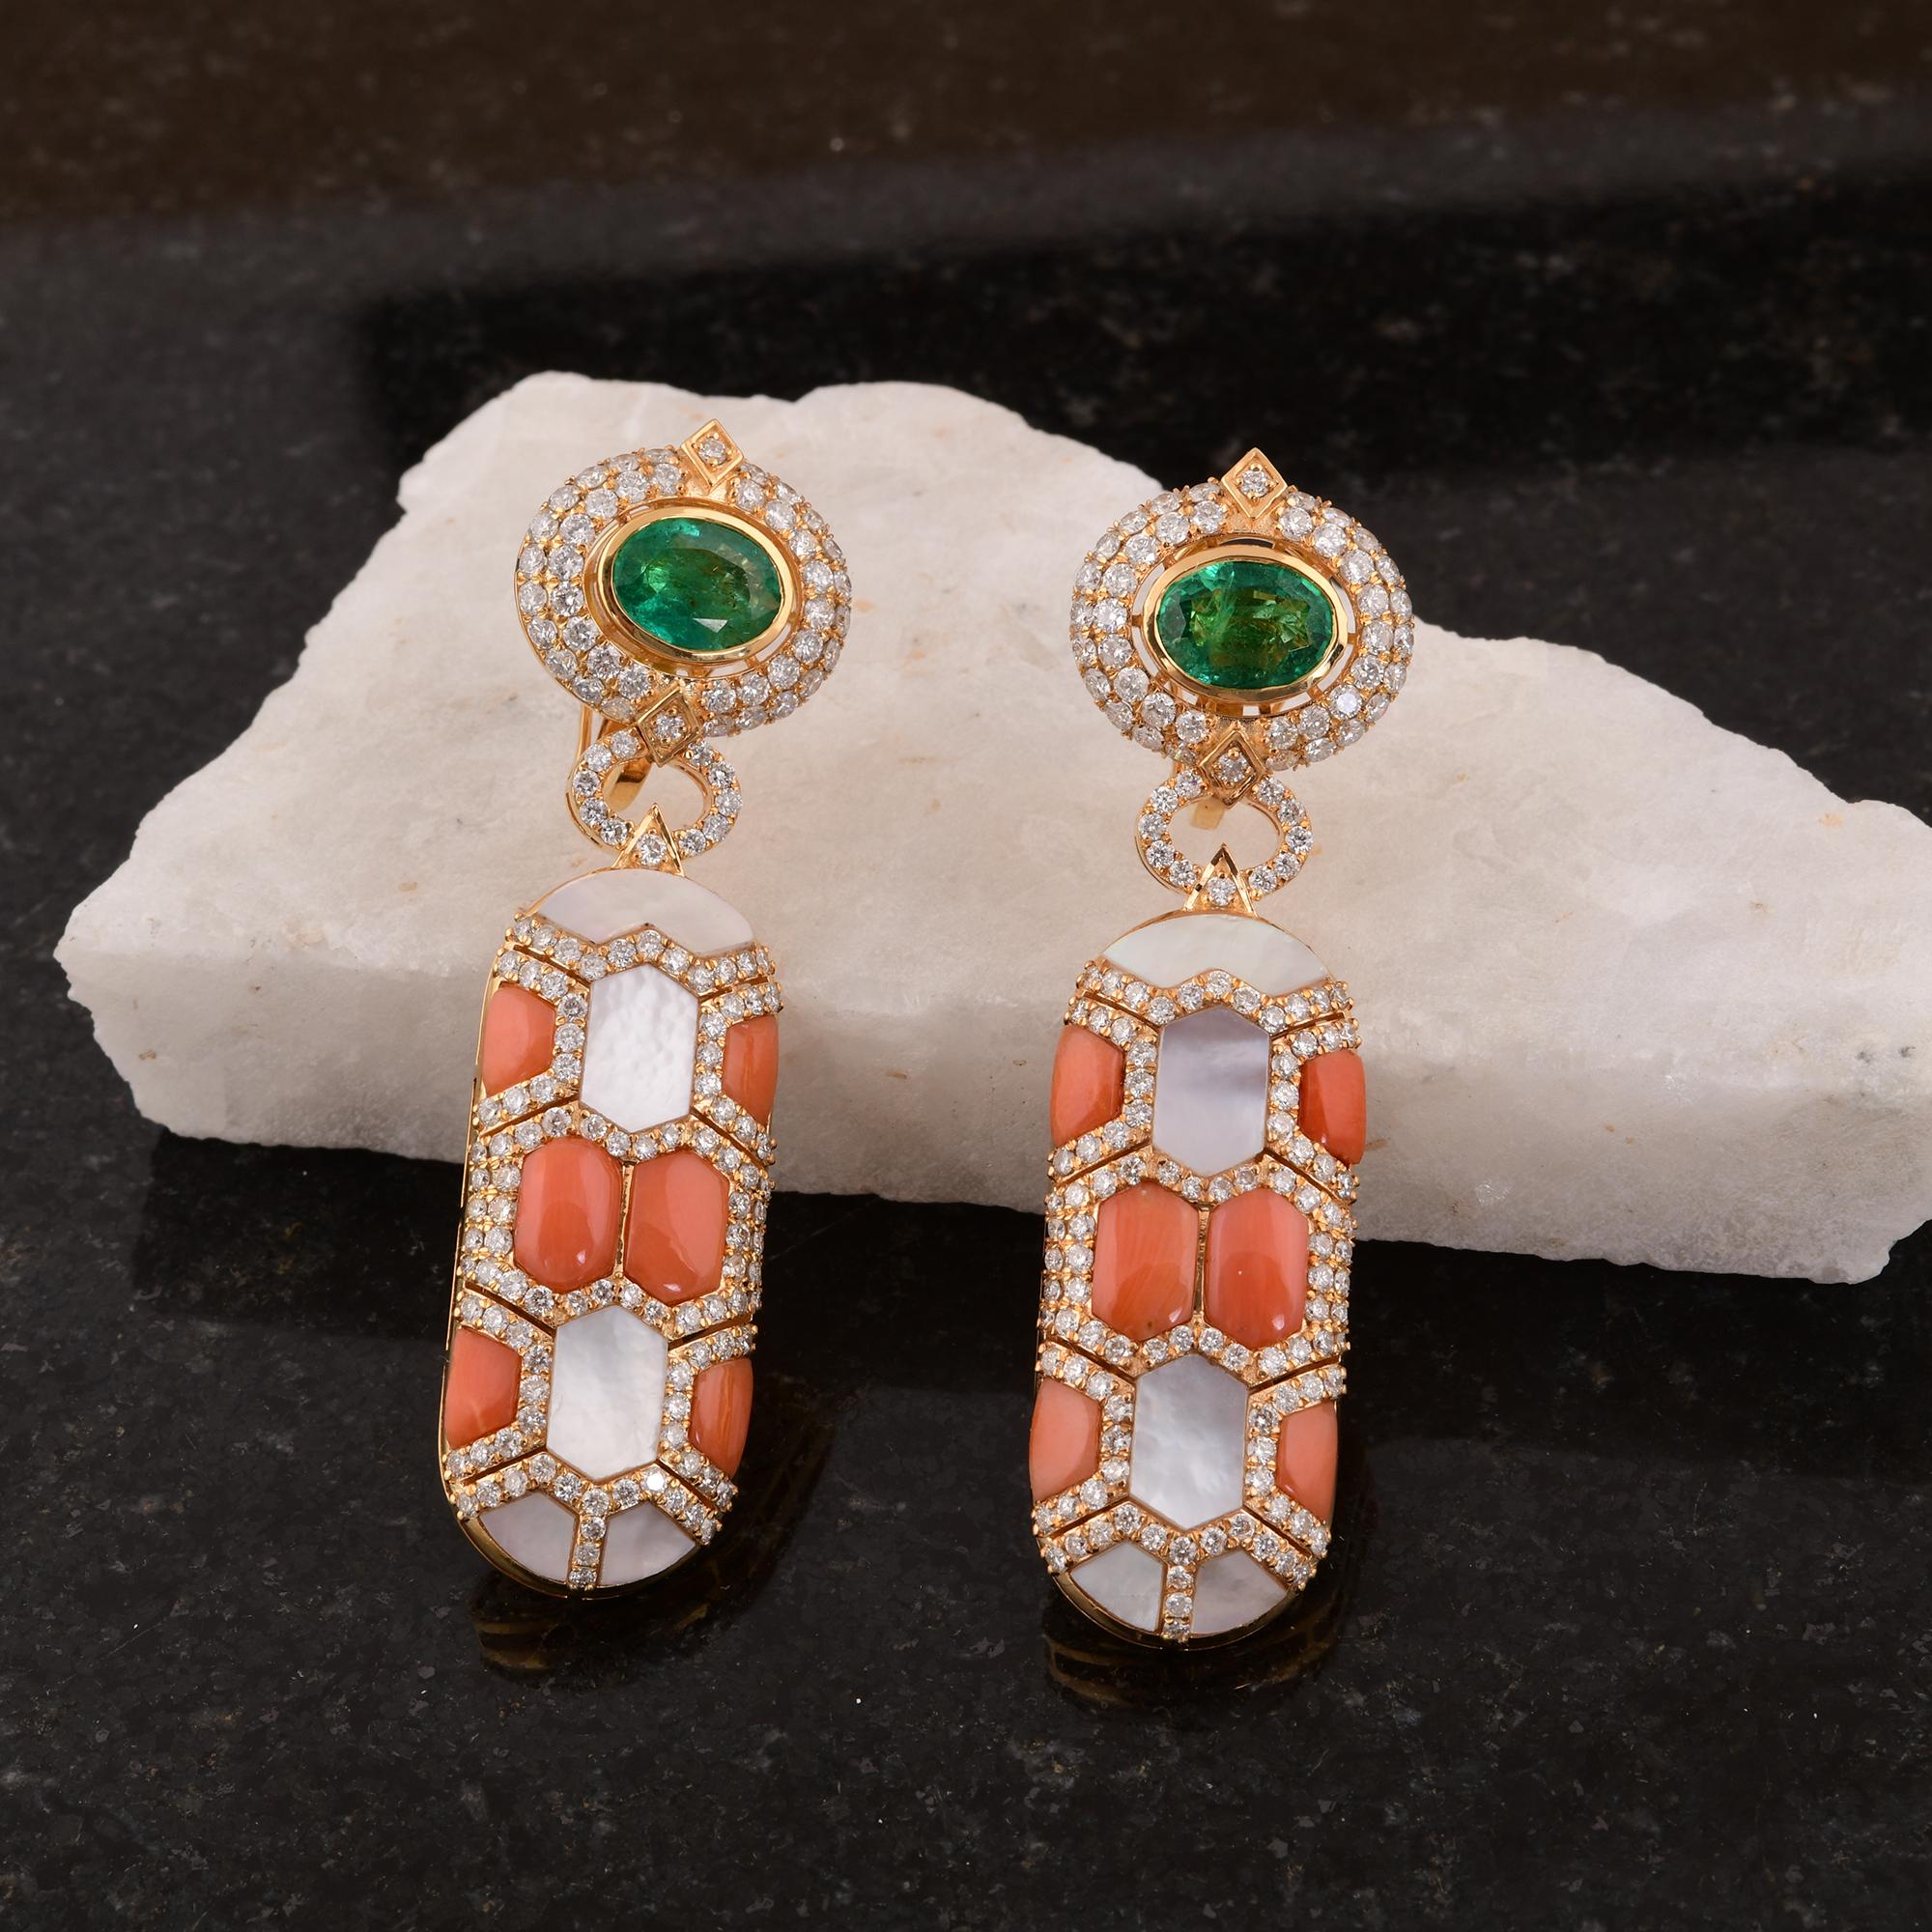 Oval Cut Natural Coral Emerald MOP Gemstone Earrings Diamond 14 Karat Yellow Gold Jewelry For Sale